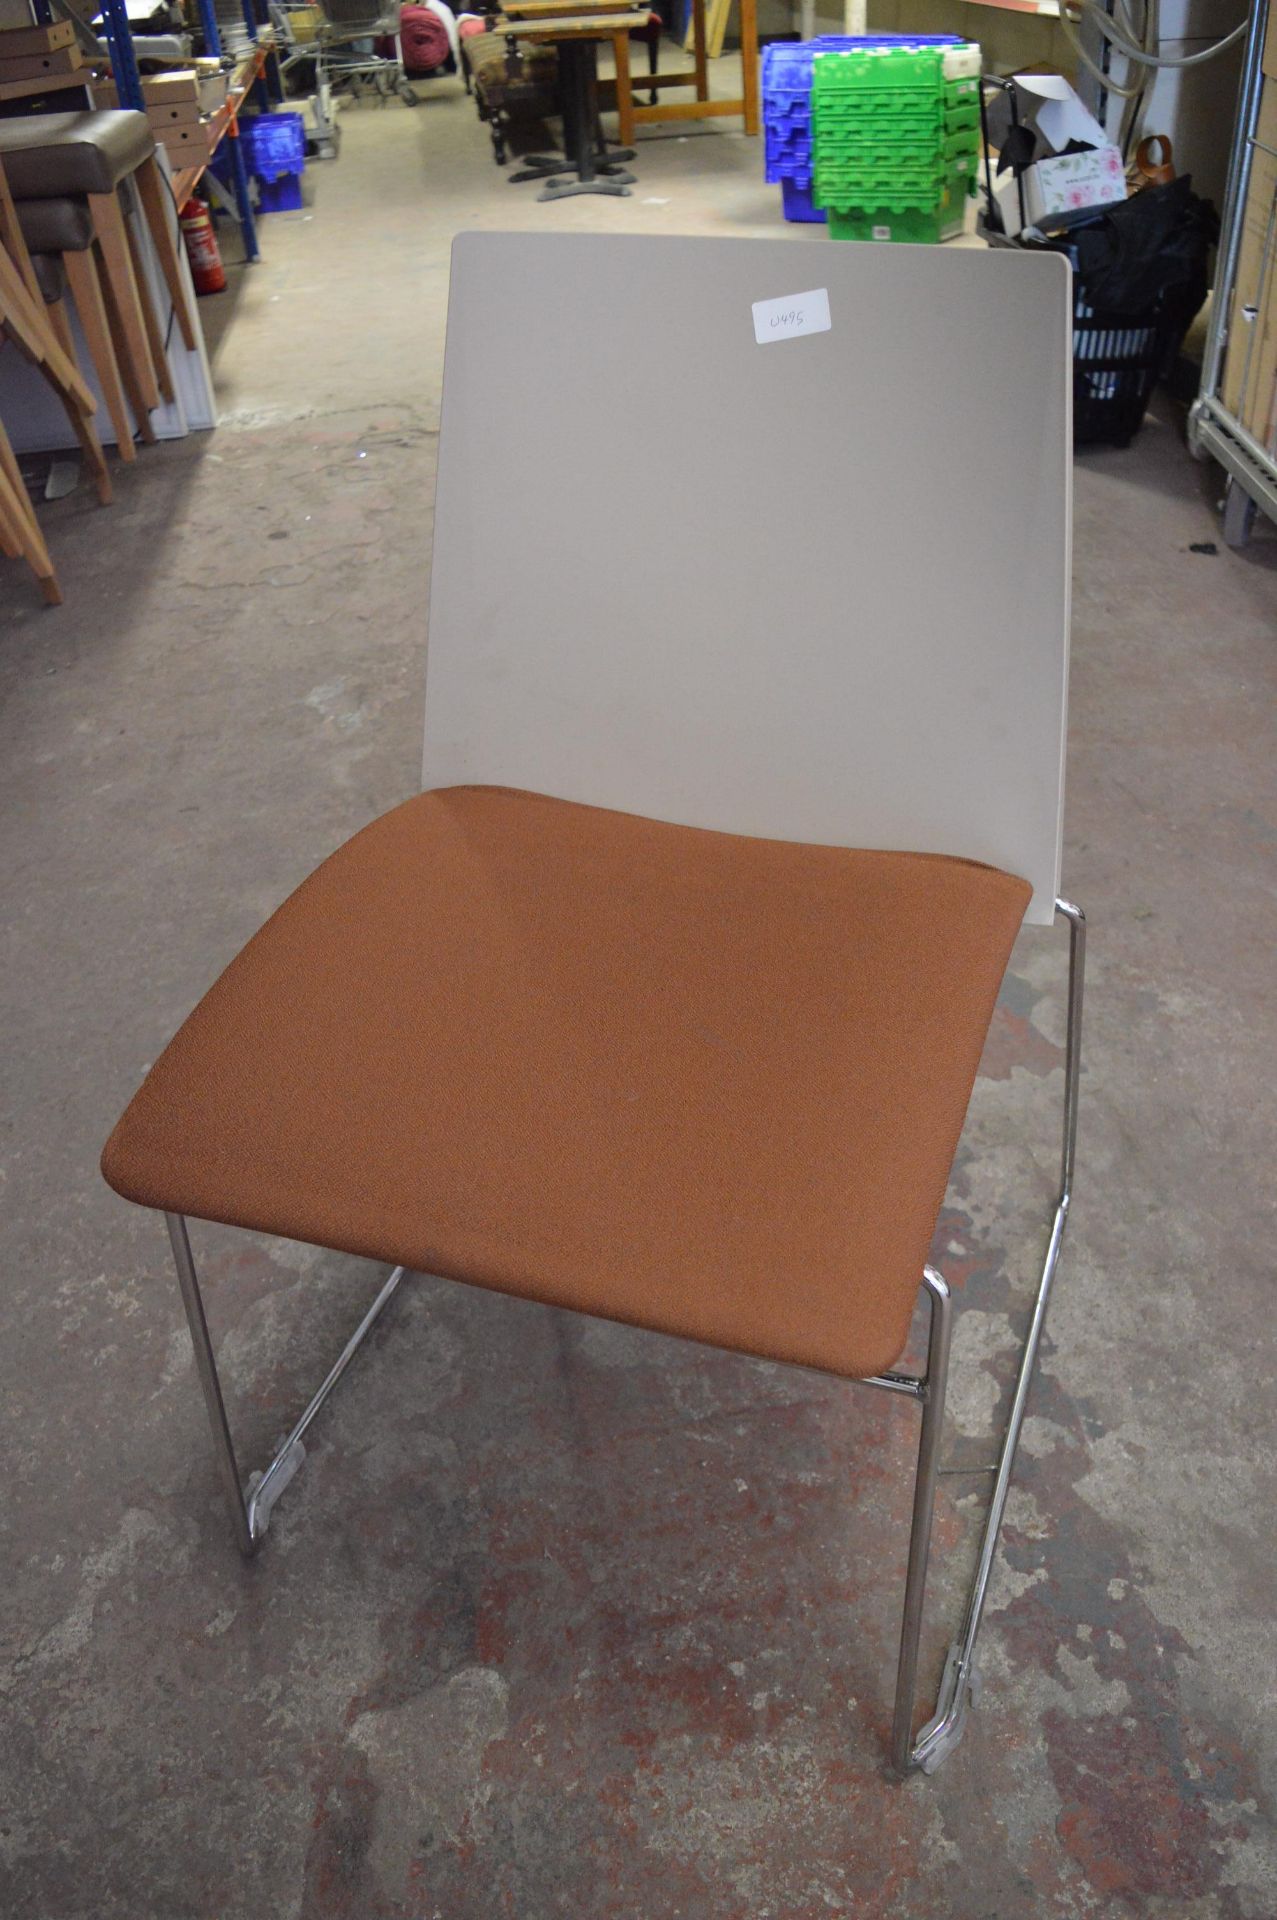 Ten Stackable Tubular Framed Chairs with Brown Upholstered Seats and Plastic Backs